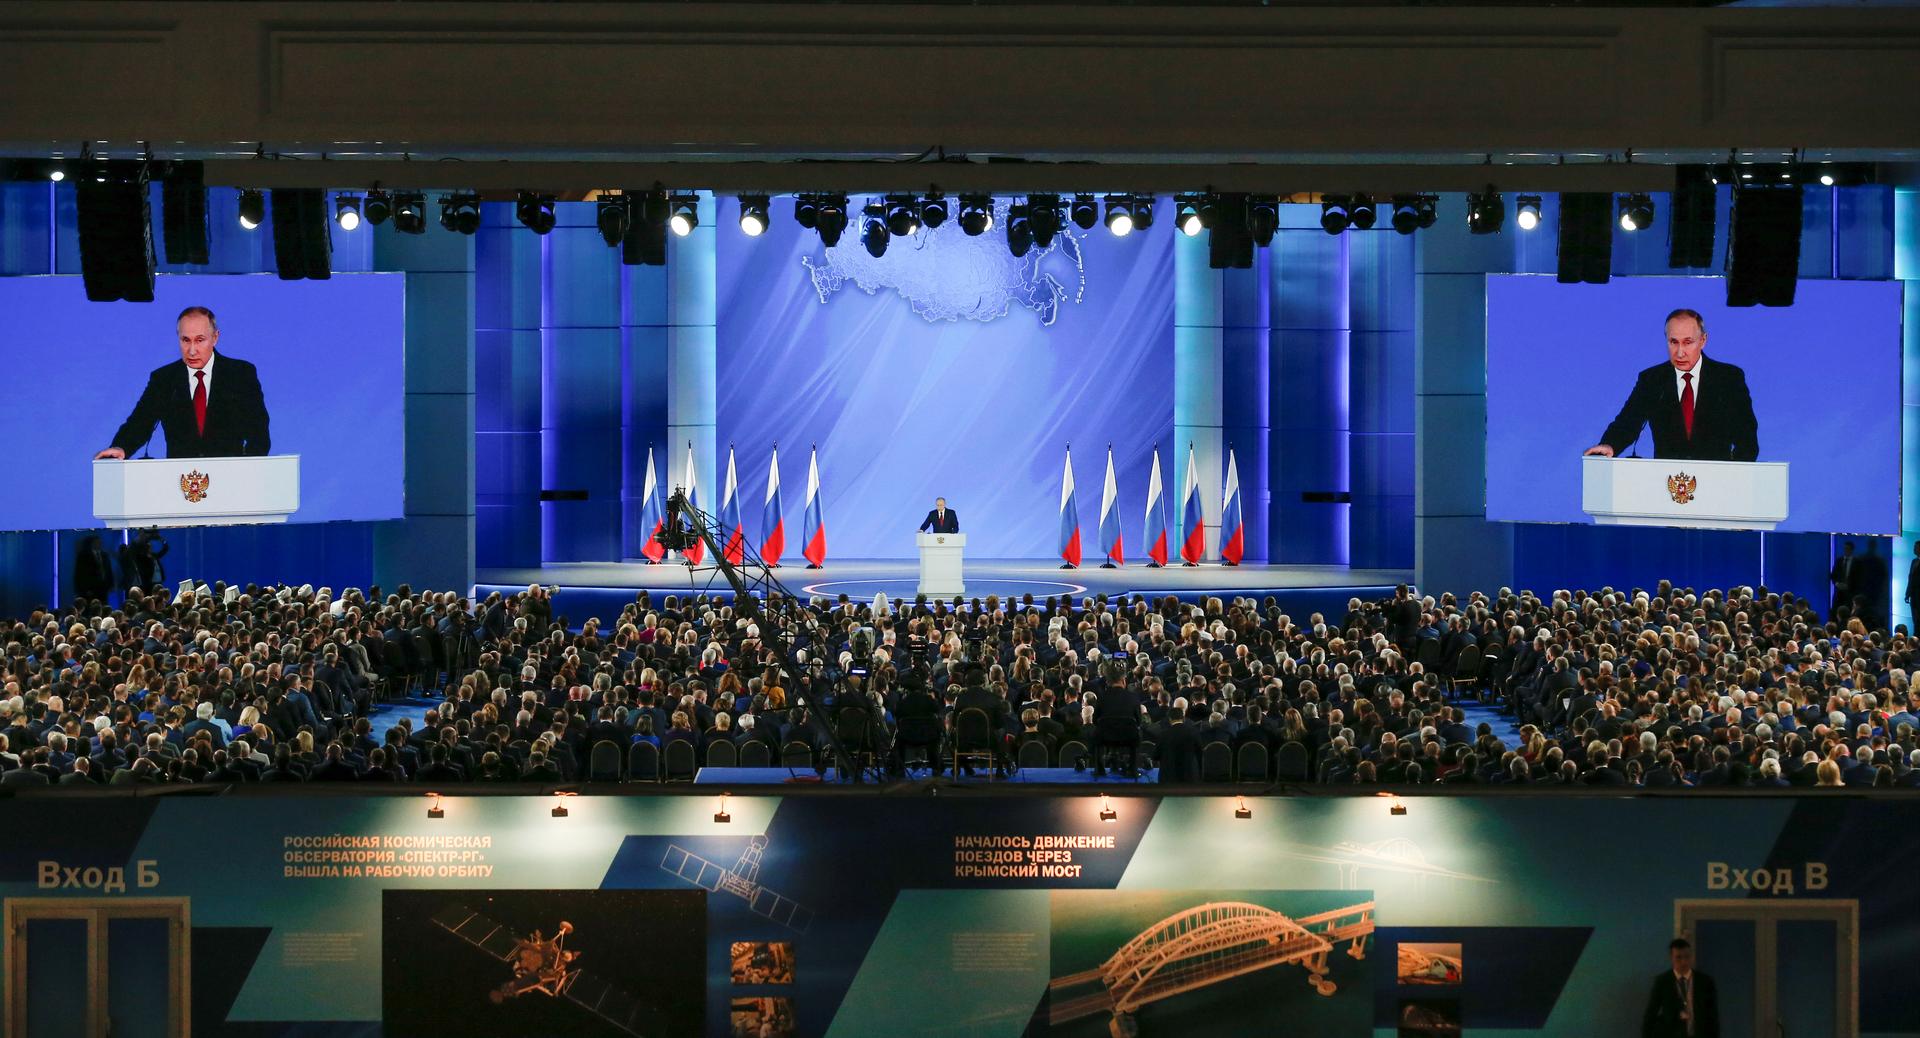 A man speaks from a podium in front of an audience. He is flanked by Russian flags and screens